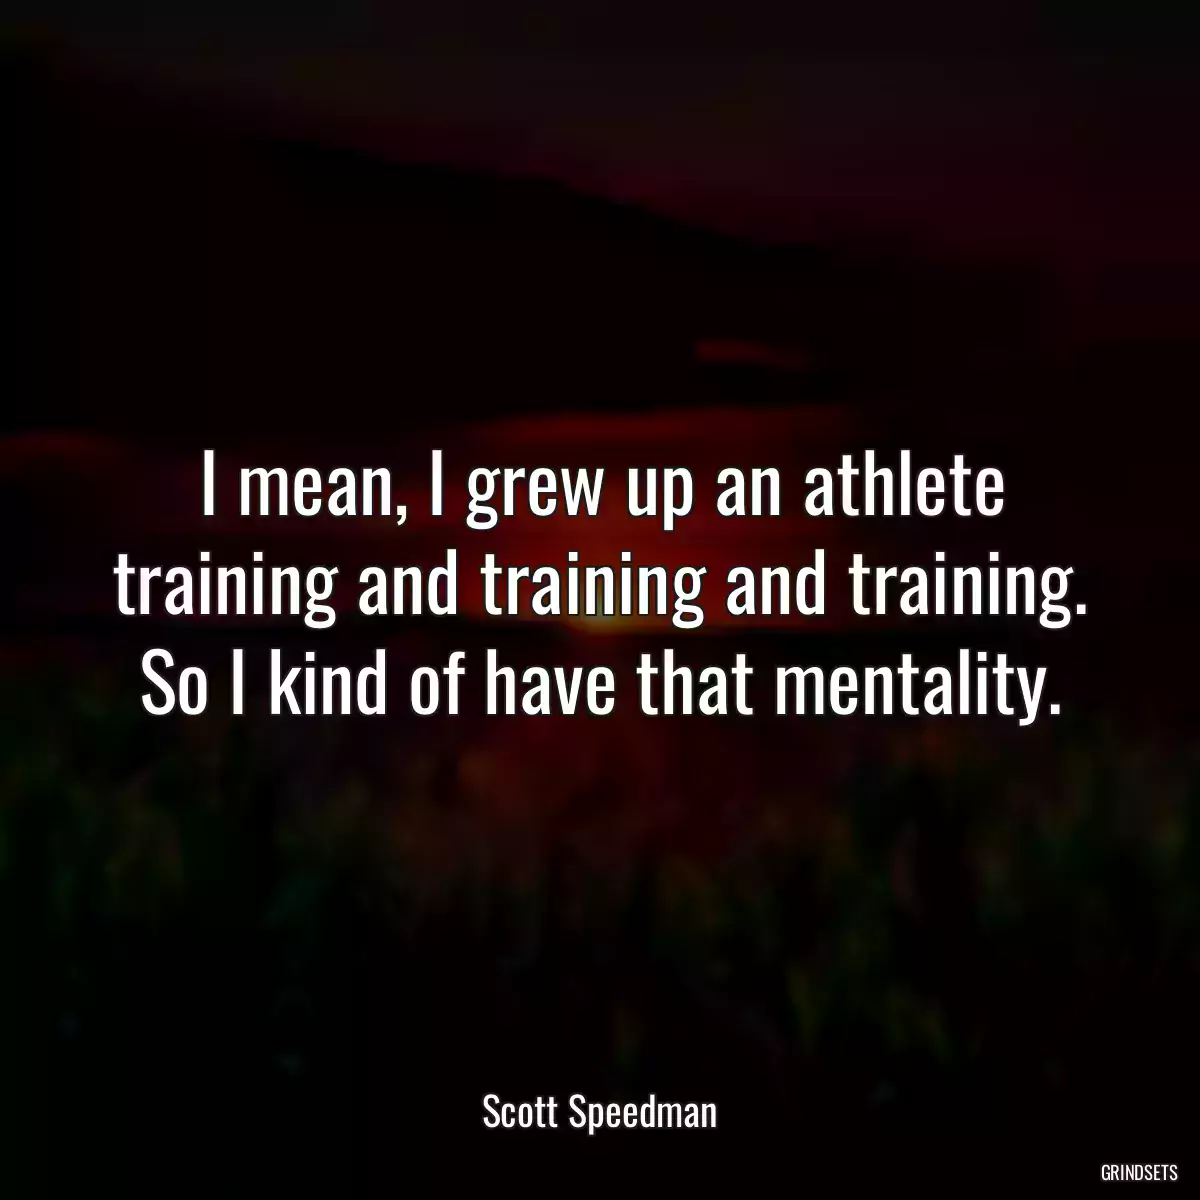 I mean, I grew up an athlete training and training and training. So I kind of have that mentality.